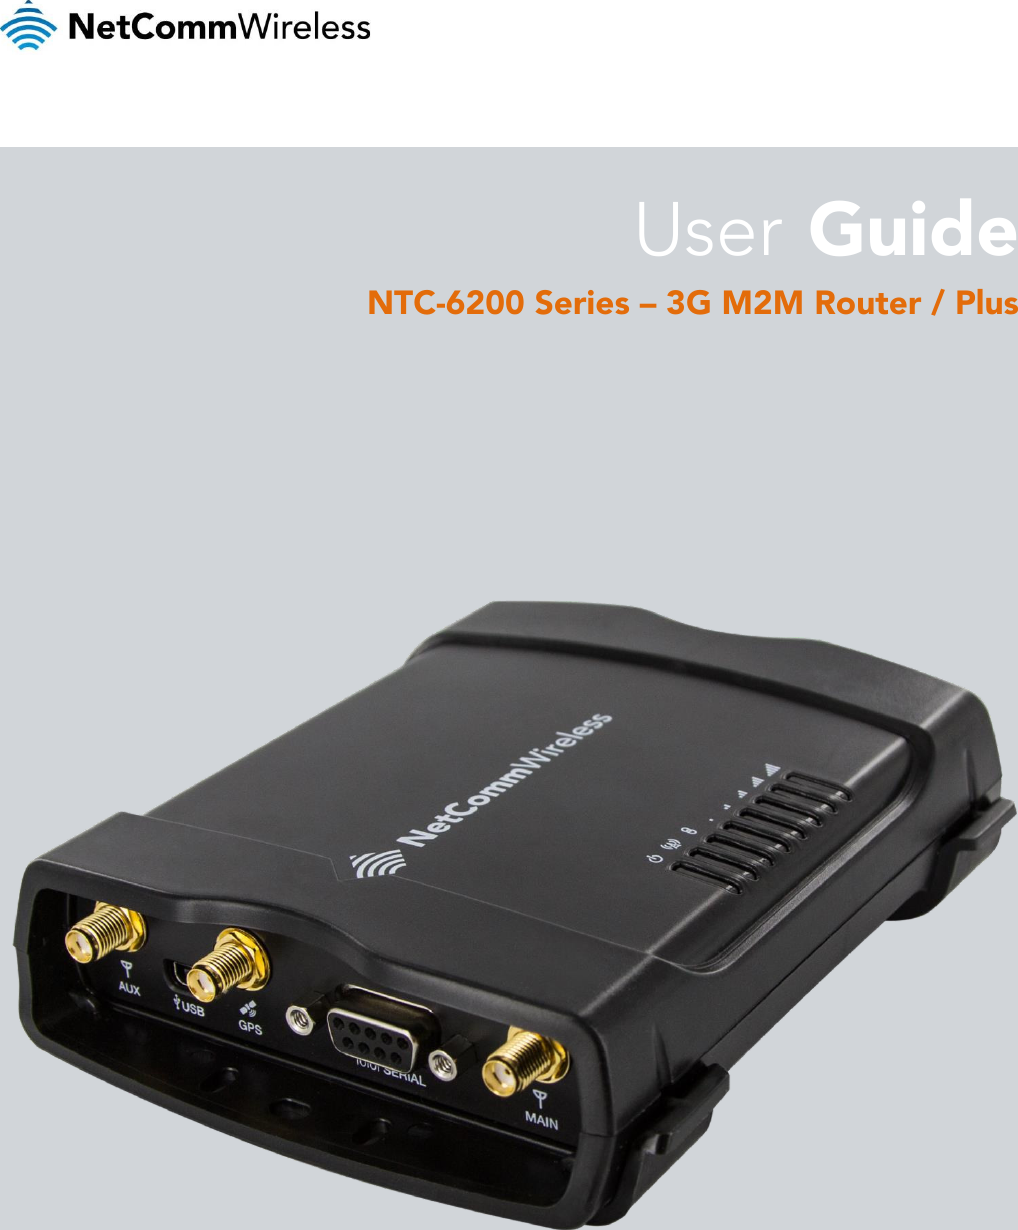                          User  Guide NTC-6200 Series – 3G M2M Router / Plus 